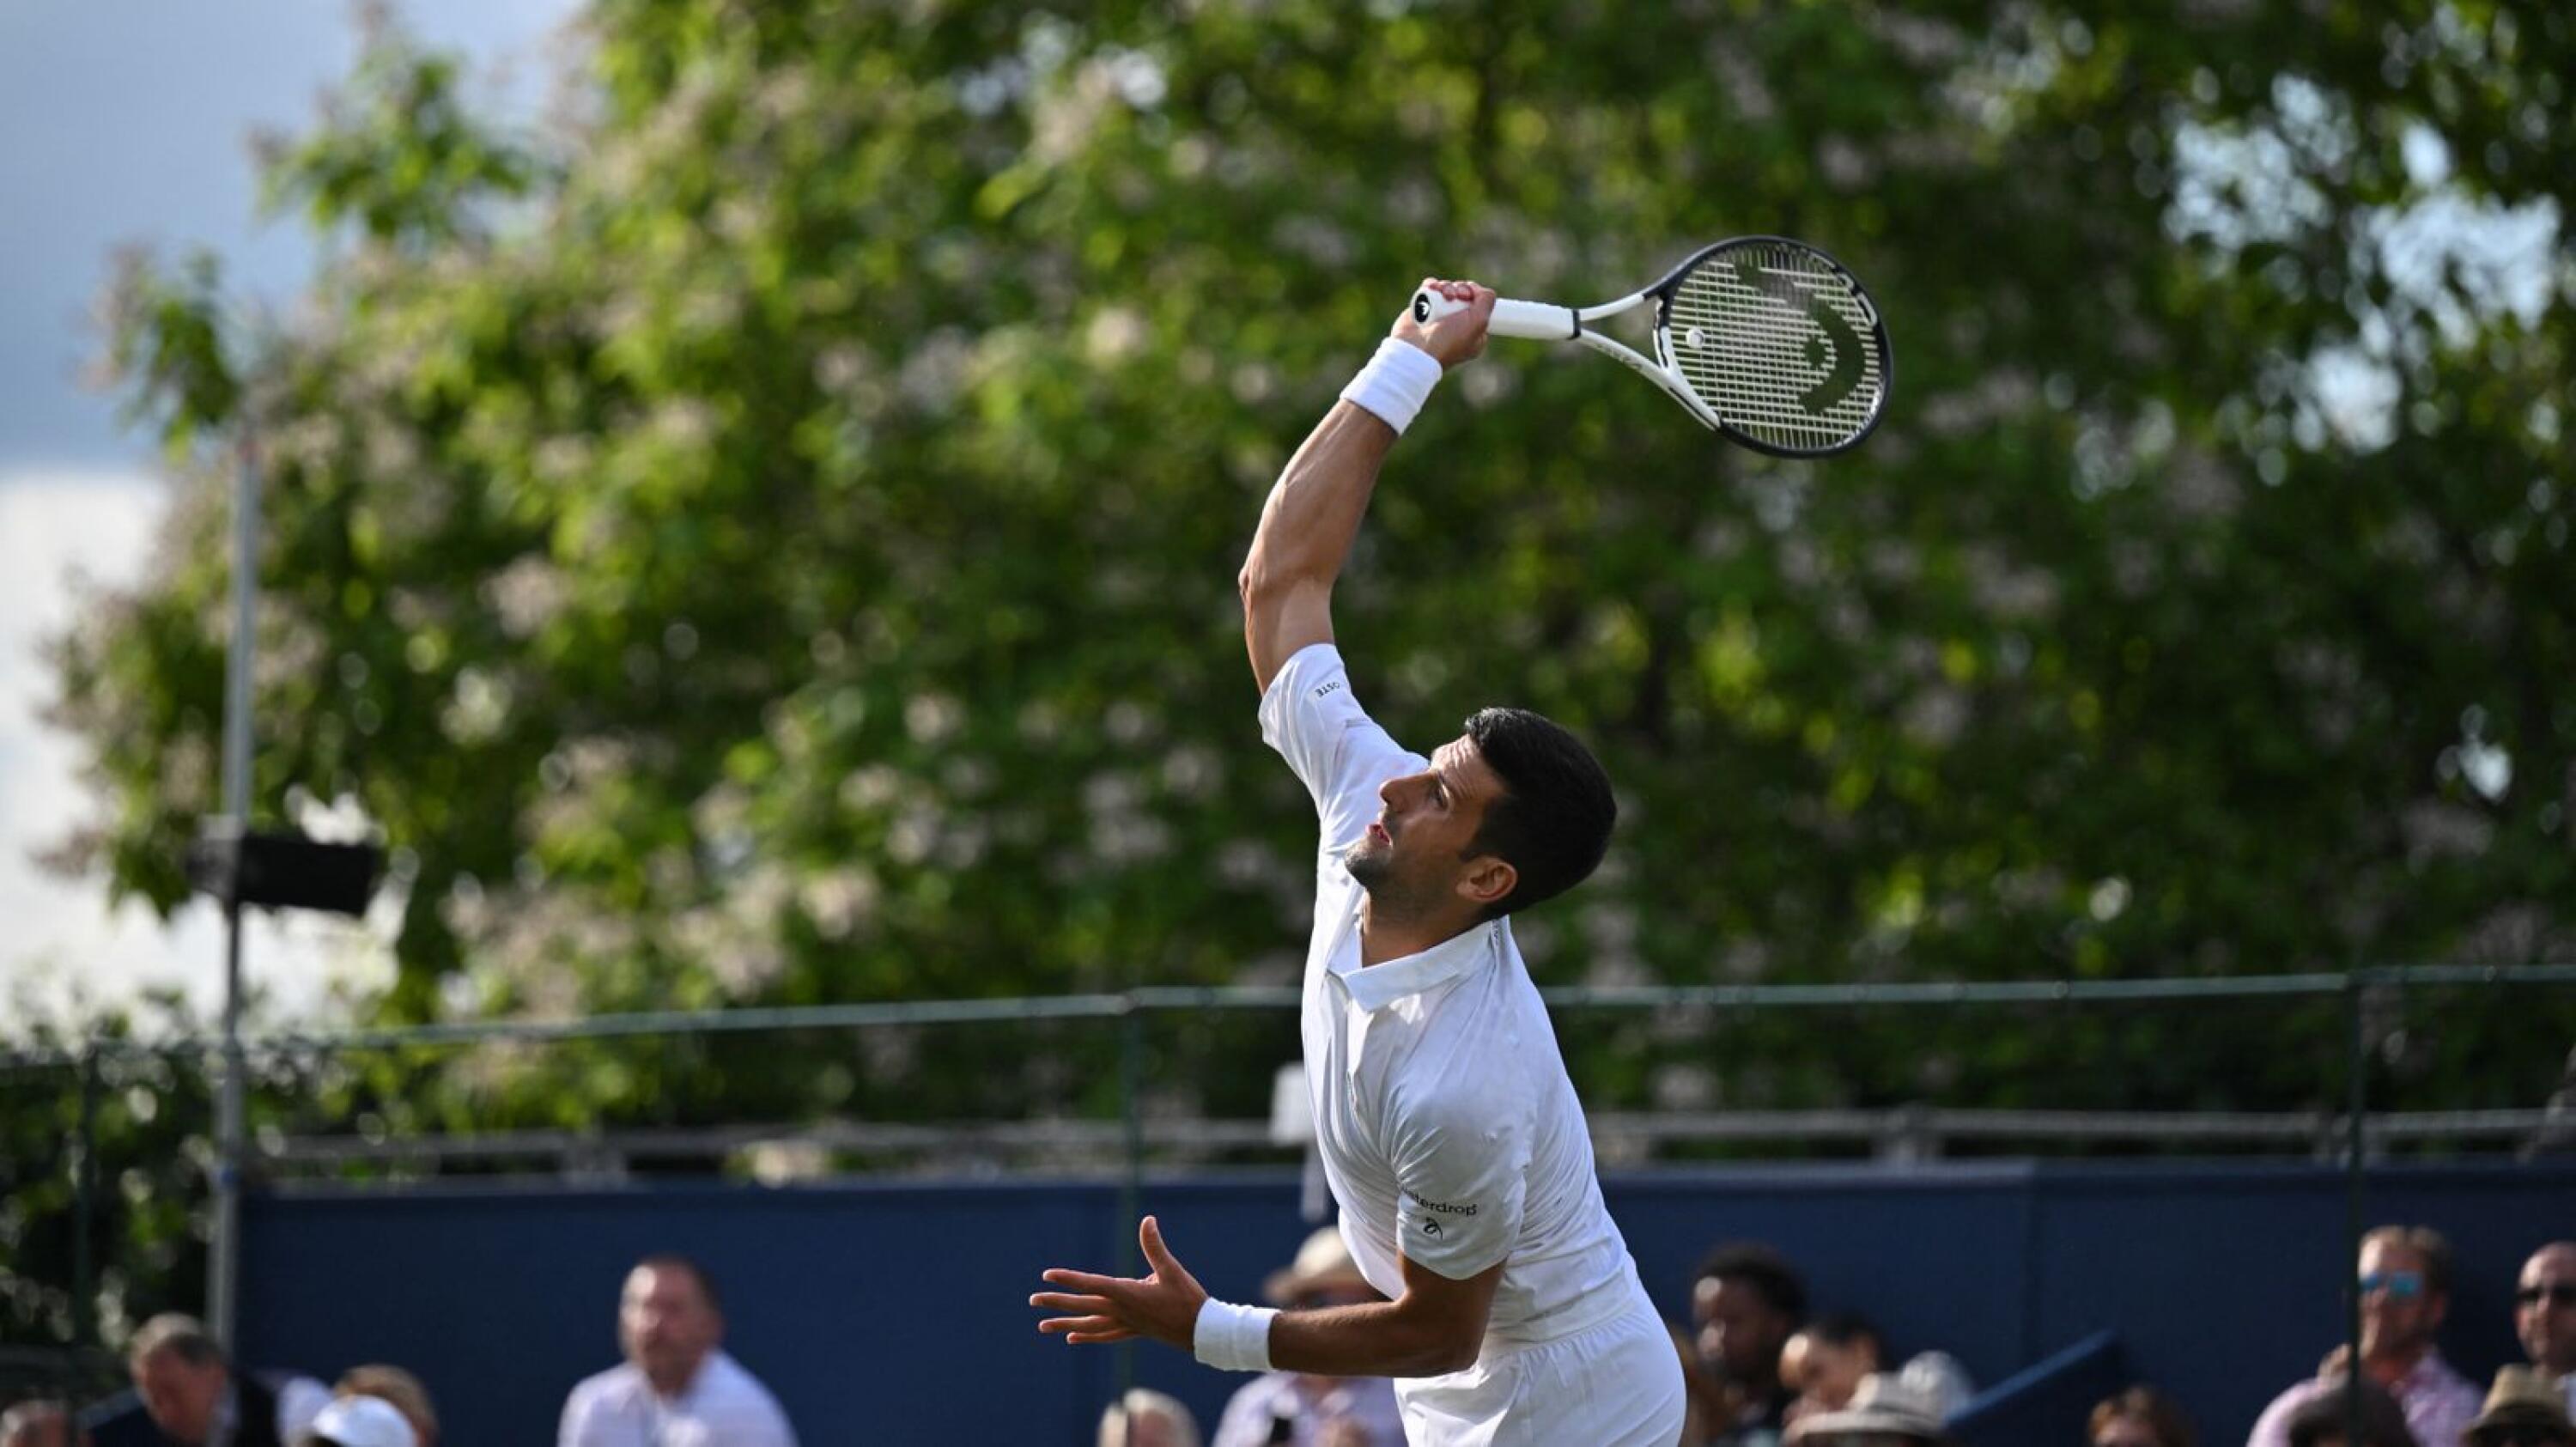 Serbia's Novak Djokovic serves to US player Frances Tiafoe during their men's singles exhibition match at The Giorgio Armani Tennis Classic tournament at the Hurlingham Club in London